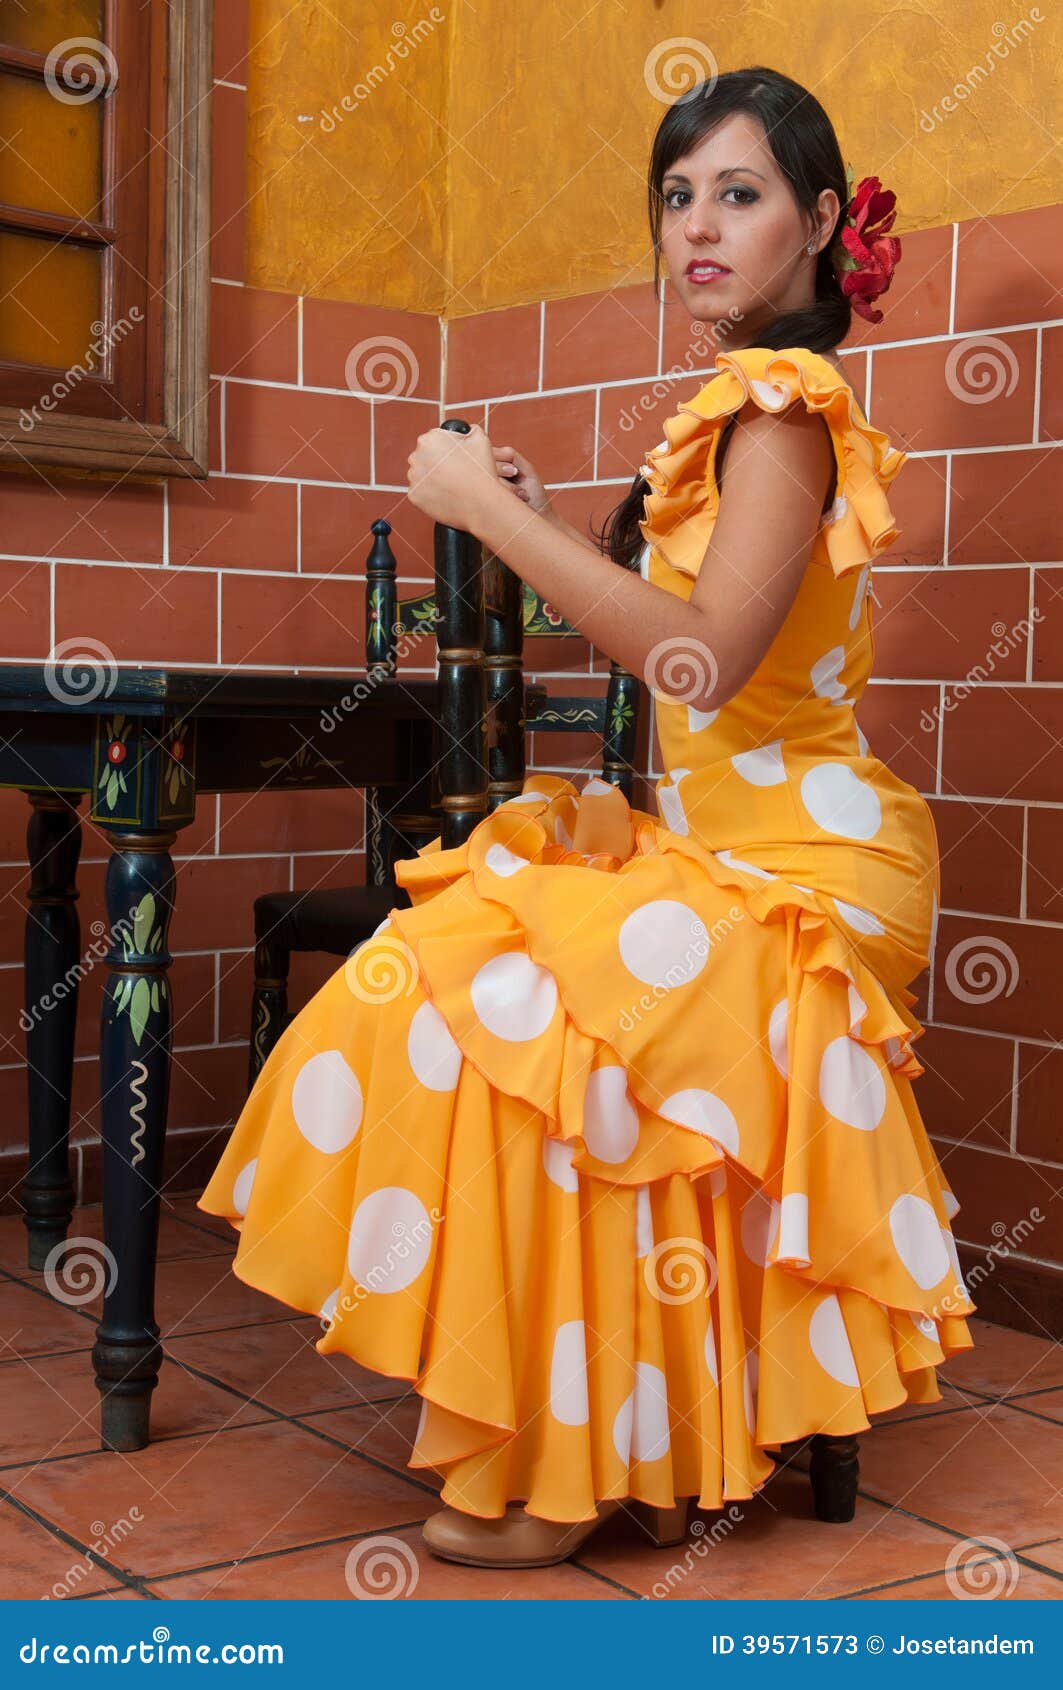 woman in traditional flamenco dresses dance during the feria de abril on april spain